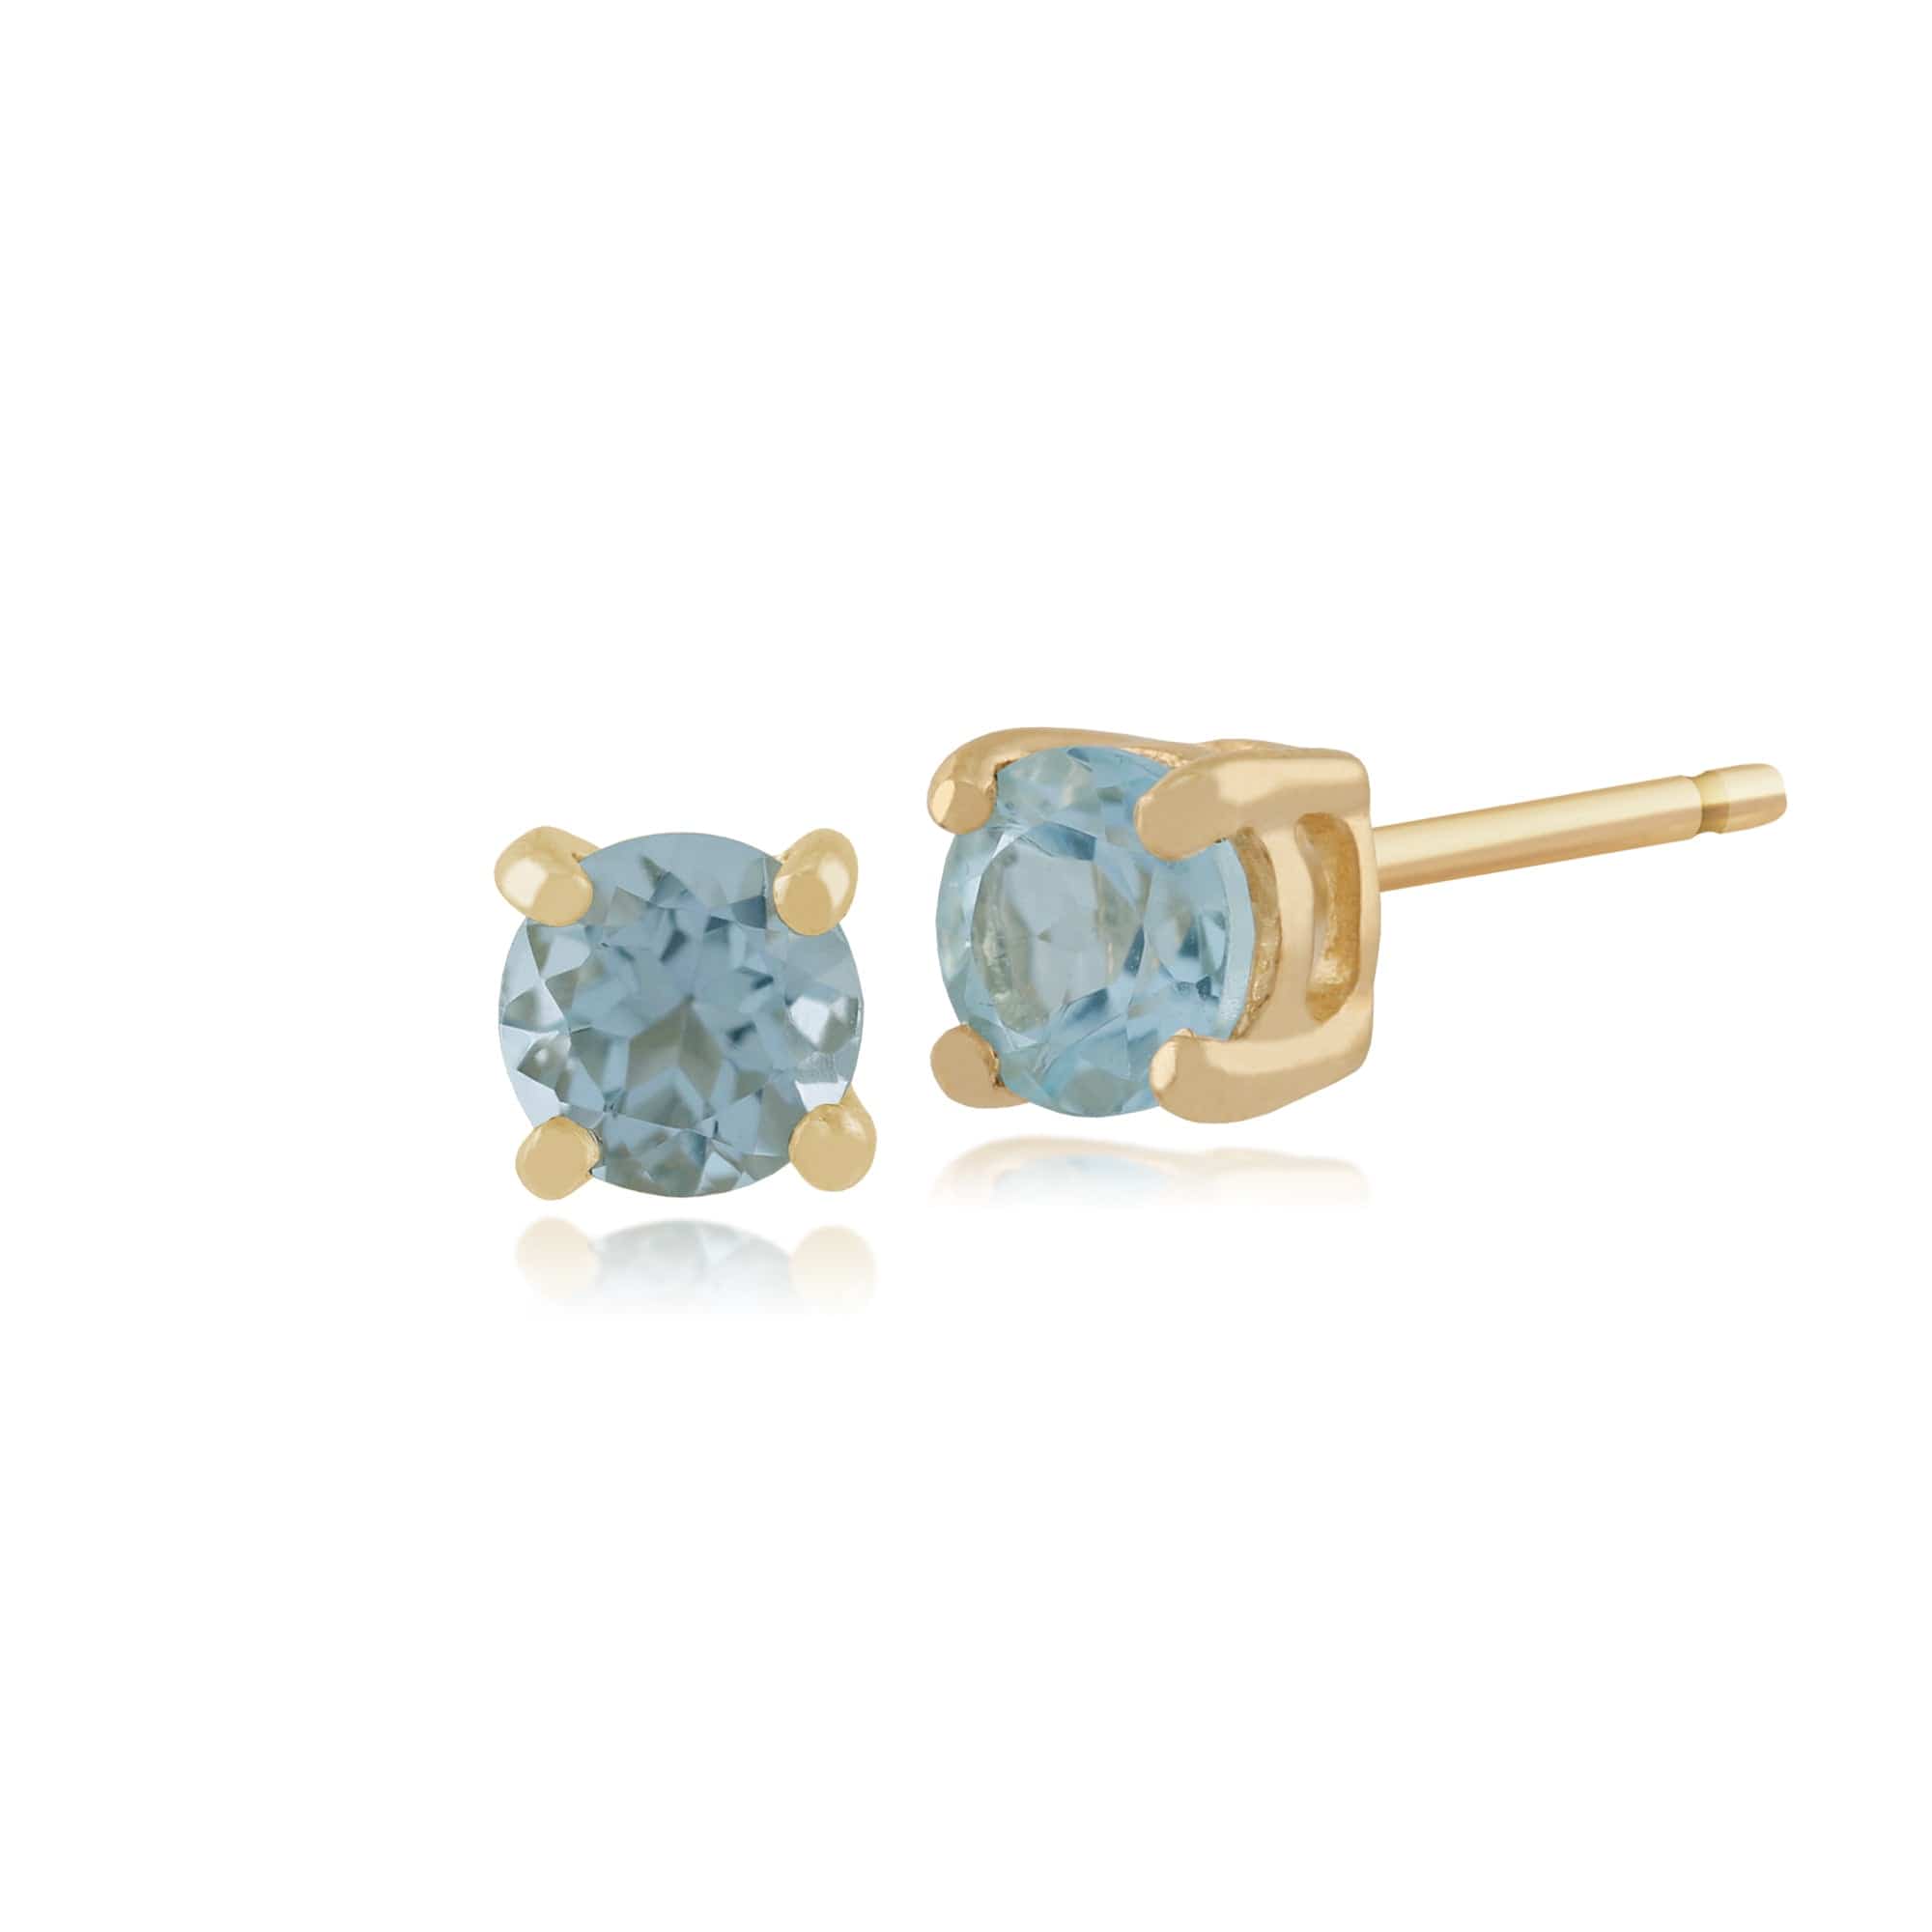 Classic Round Blue Topaz Stud Earrings with Detachable Diamond Floral Ear Jacket in 9ct Yellow Gold - Gemondo